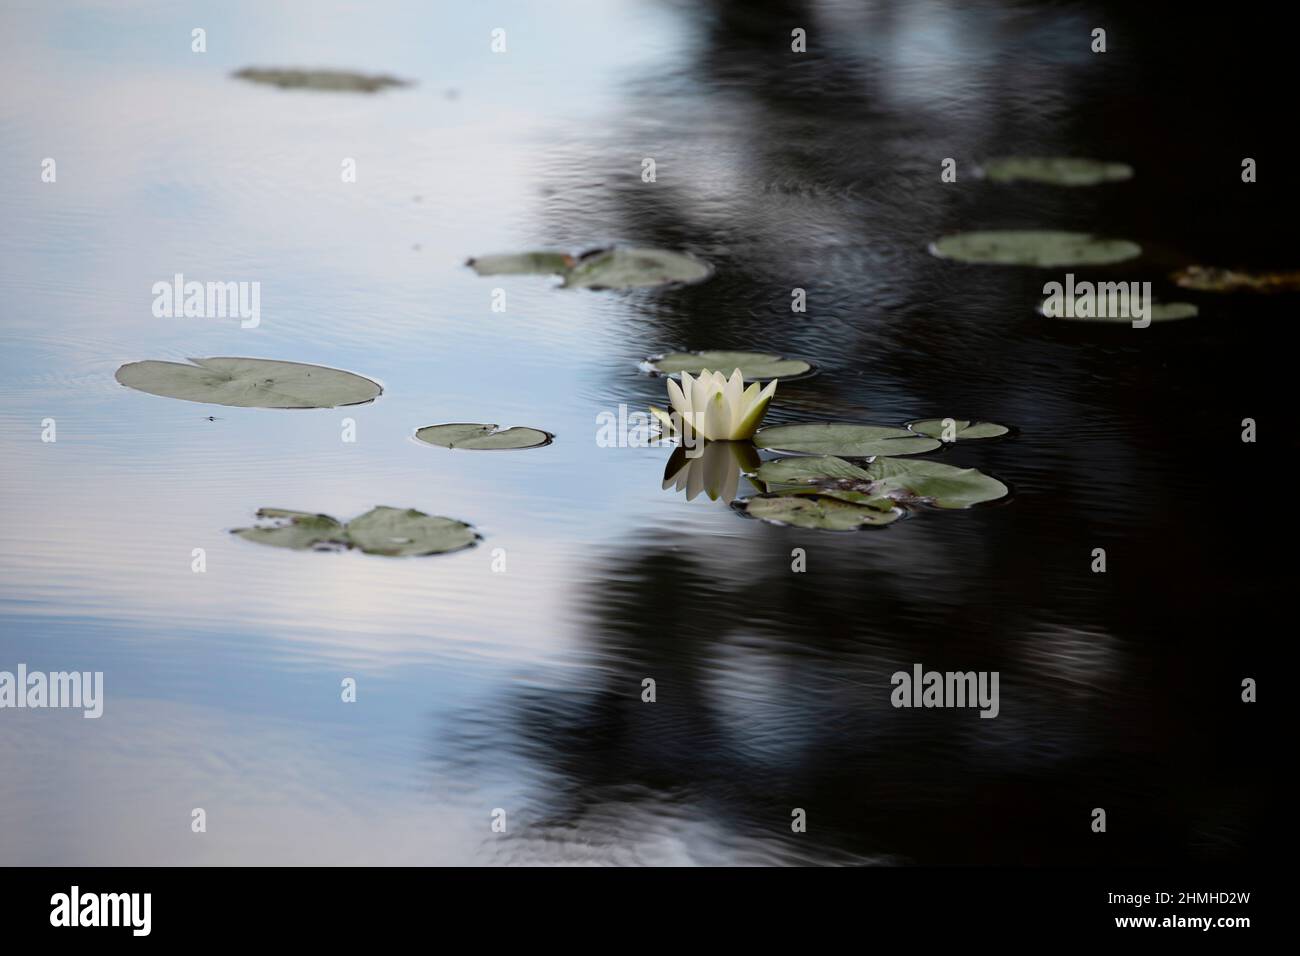 Water lily flower, calm lake surface, summer scene, Finland Stock Photo